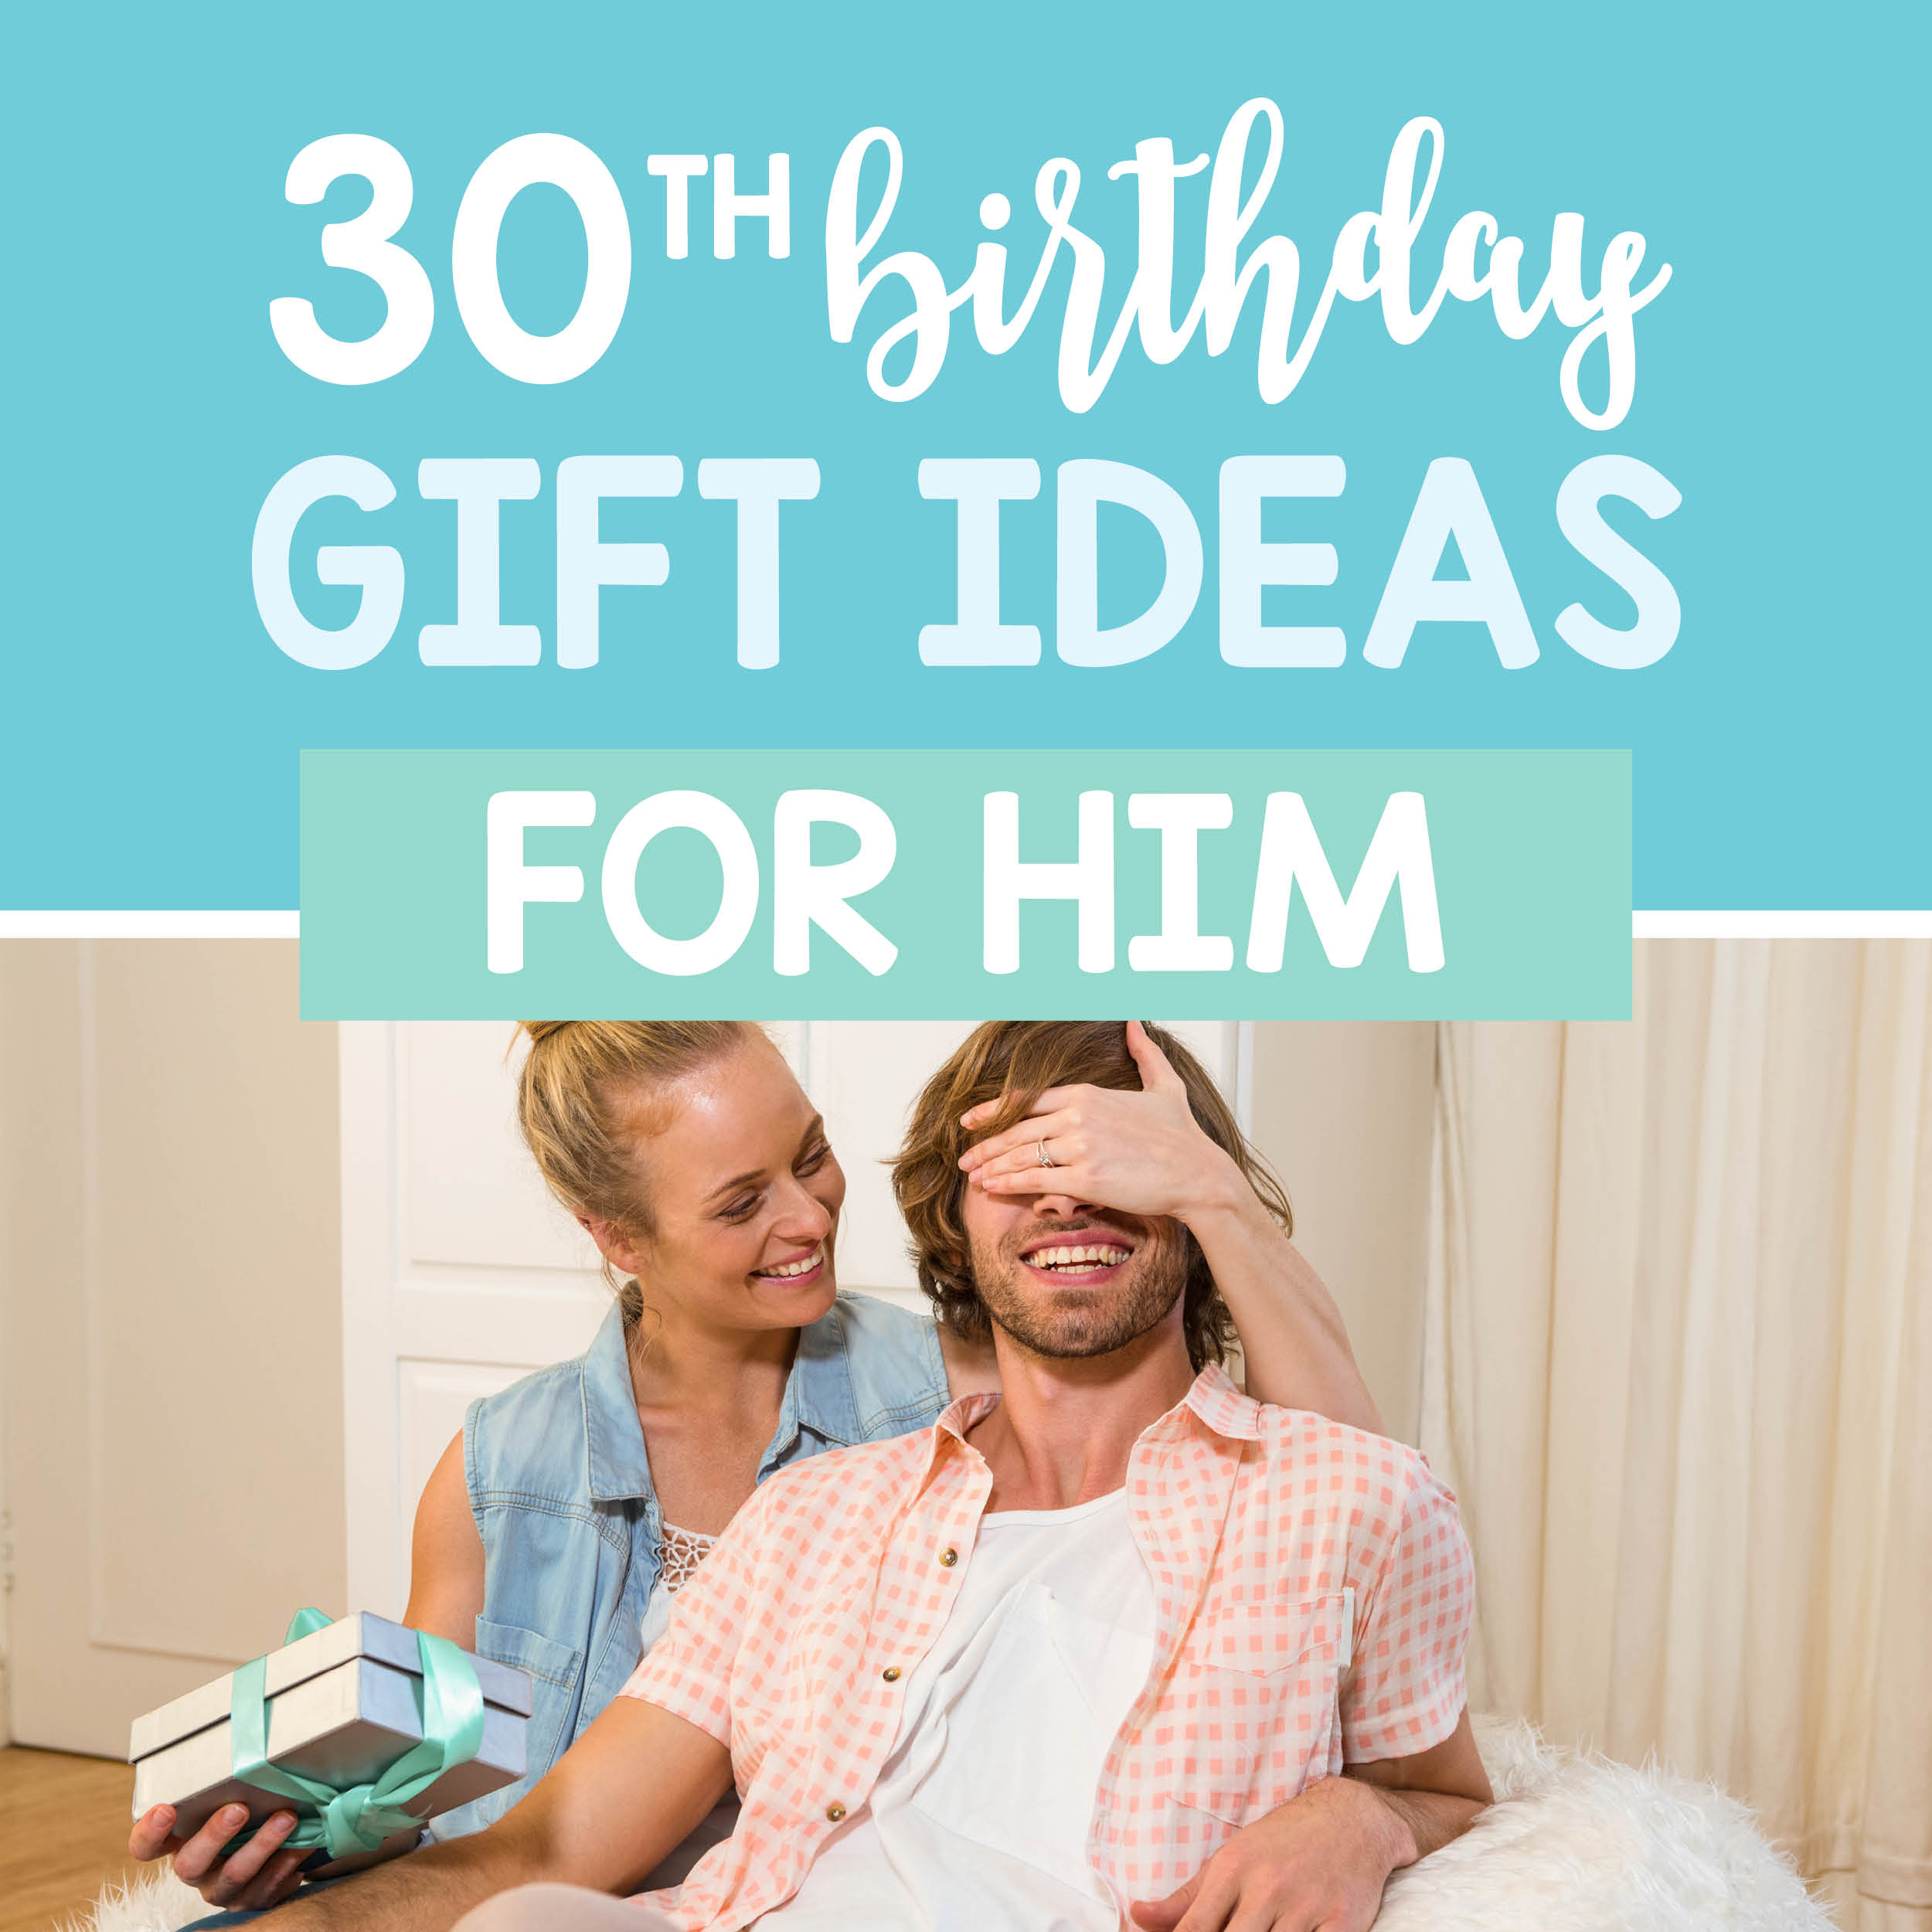 30 gift ideas for 30th birthday for husband